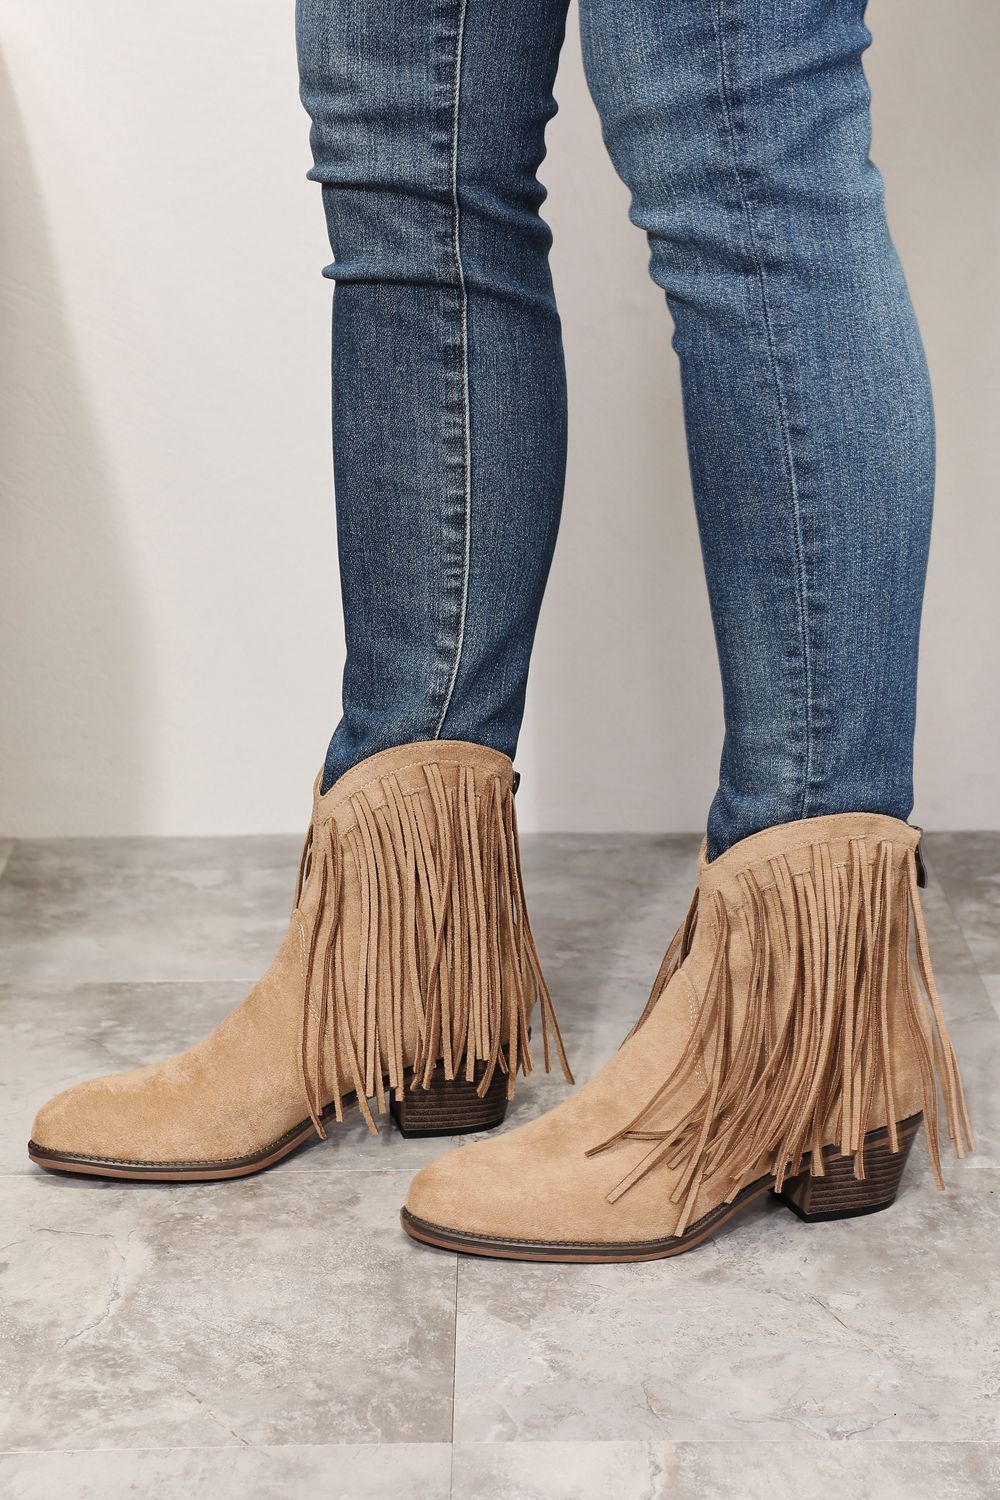 Legend Fringe Cowboy Western Pointy Toe Country Cowgirl Tan Ankle Bootie Boots